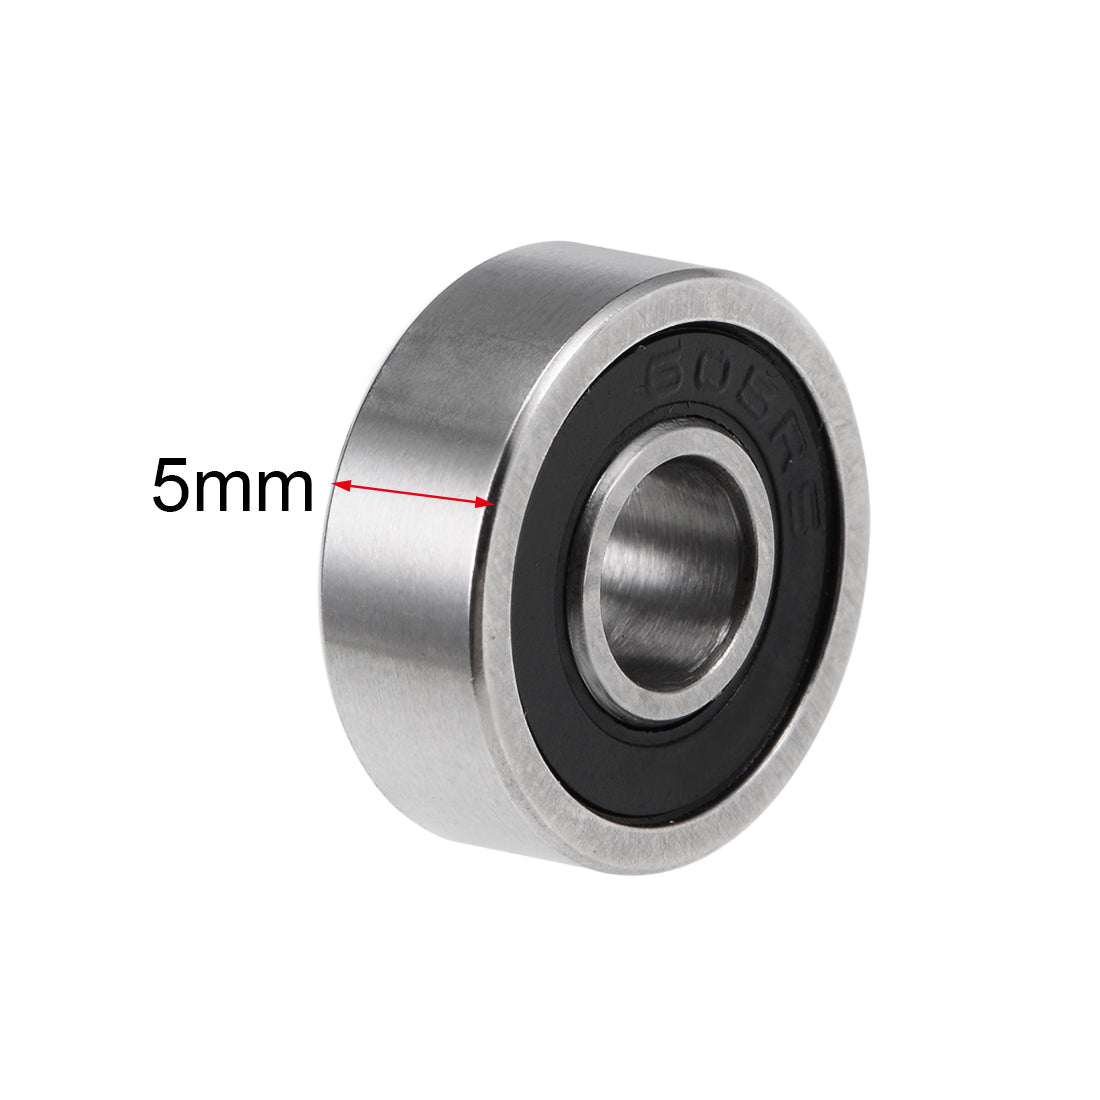 uxcell Uxcell Deep Groove Ball Bearings Z2 Double Sealed Chrome Steel Roller